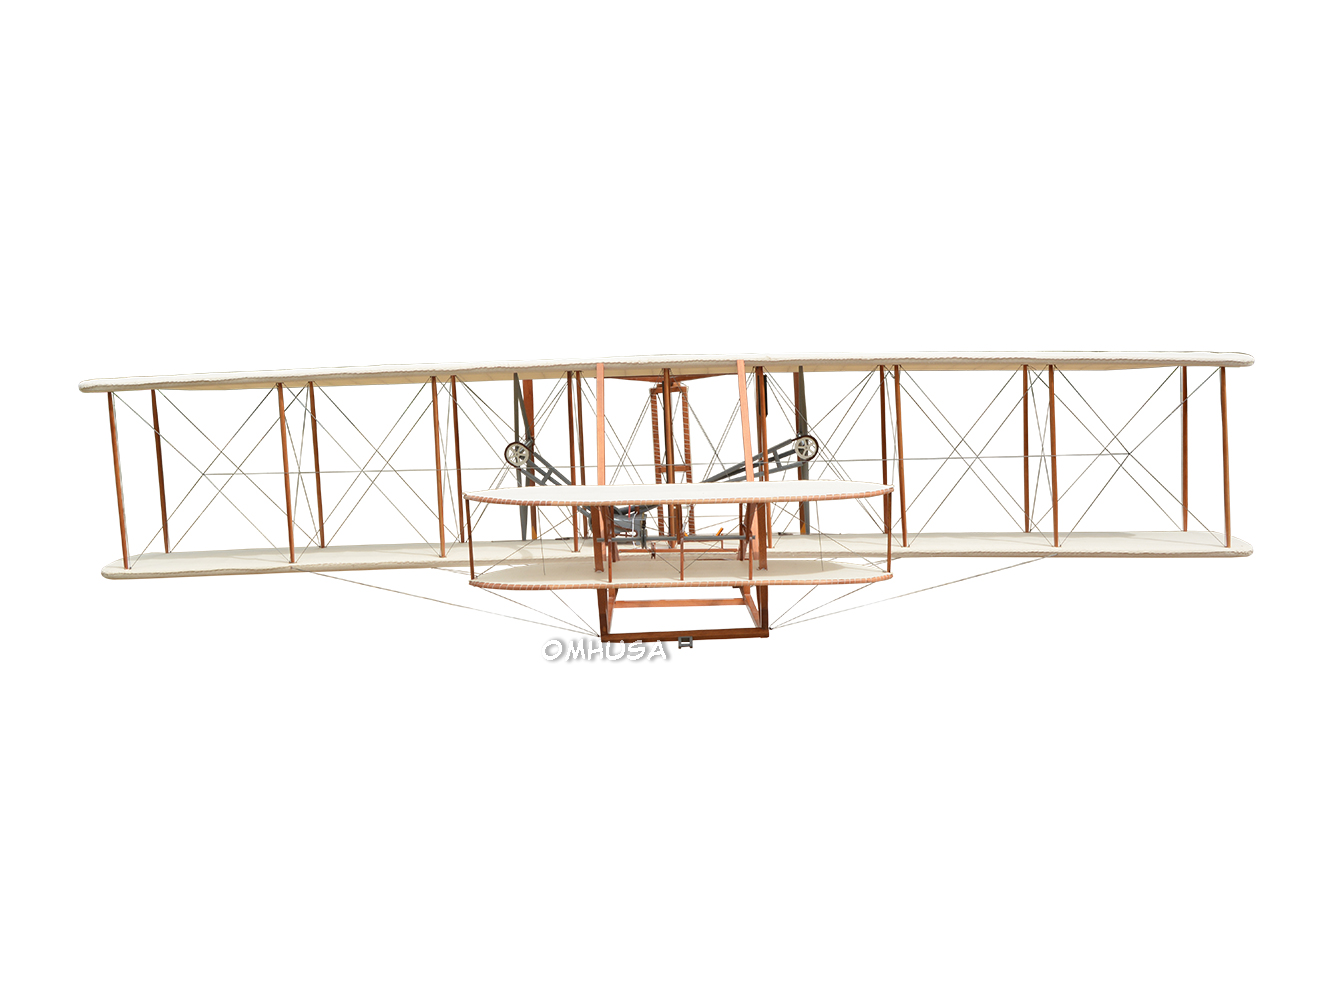 Q064 1903 Wright Brother Flyer Model 8-ft q064-1903-wright-brother-flyer-model-8ft-l01.jpg